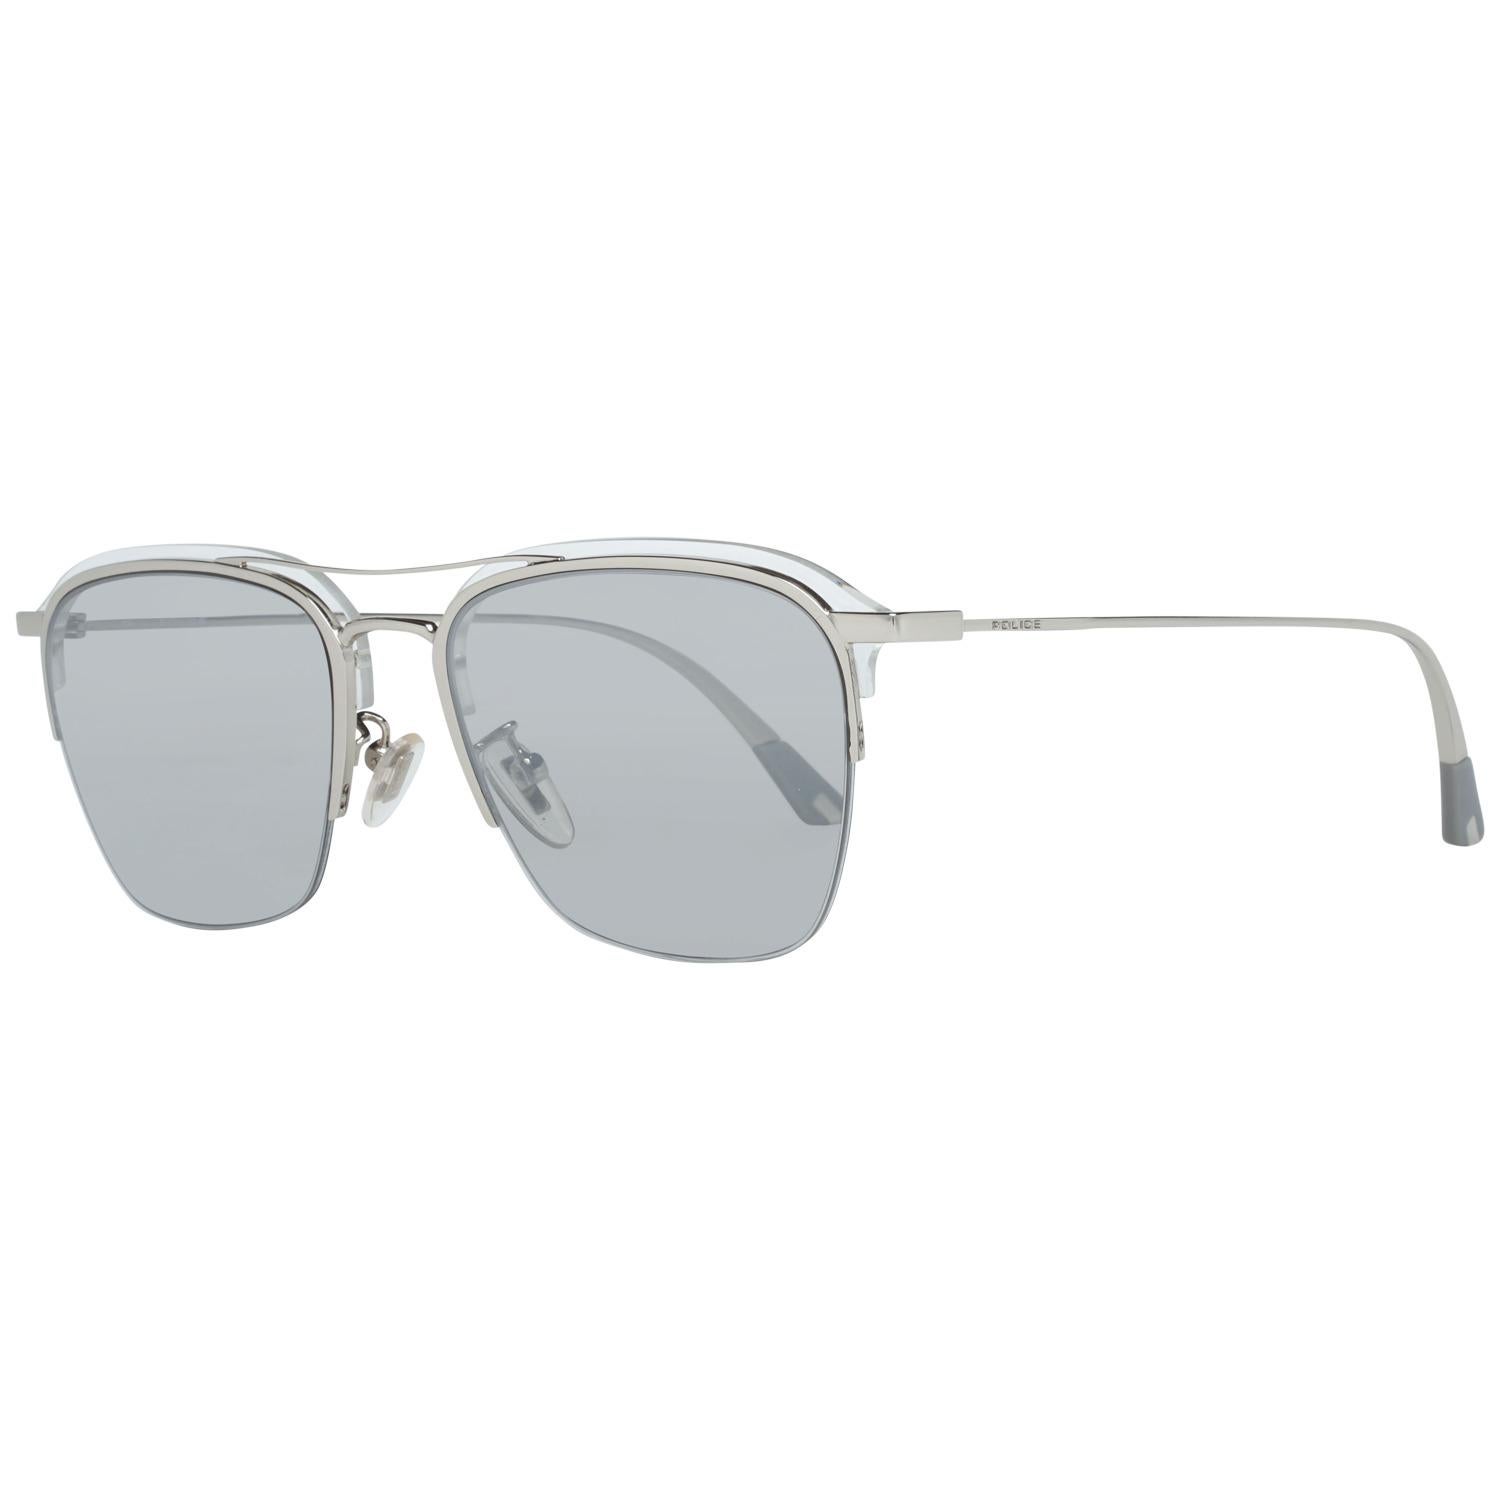 Details
MATERIAL: Metal
COLOR: Silver
MODEL: SPL783 54579X
GENDER: Adult Unisex
COUNTRY OF MANUFACTURE: China
TYPE: Sunglasses
ORIGINAL CASE?: Yes
STYLE: Square
OCCASION: Casual
FEATURES: Lightweight
LENS COLOR: Silver
LENS TECHNOLOGY: Mirrored
YEAR